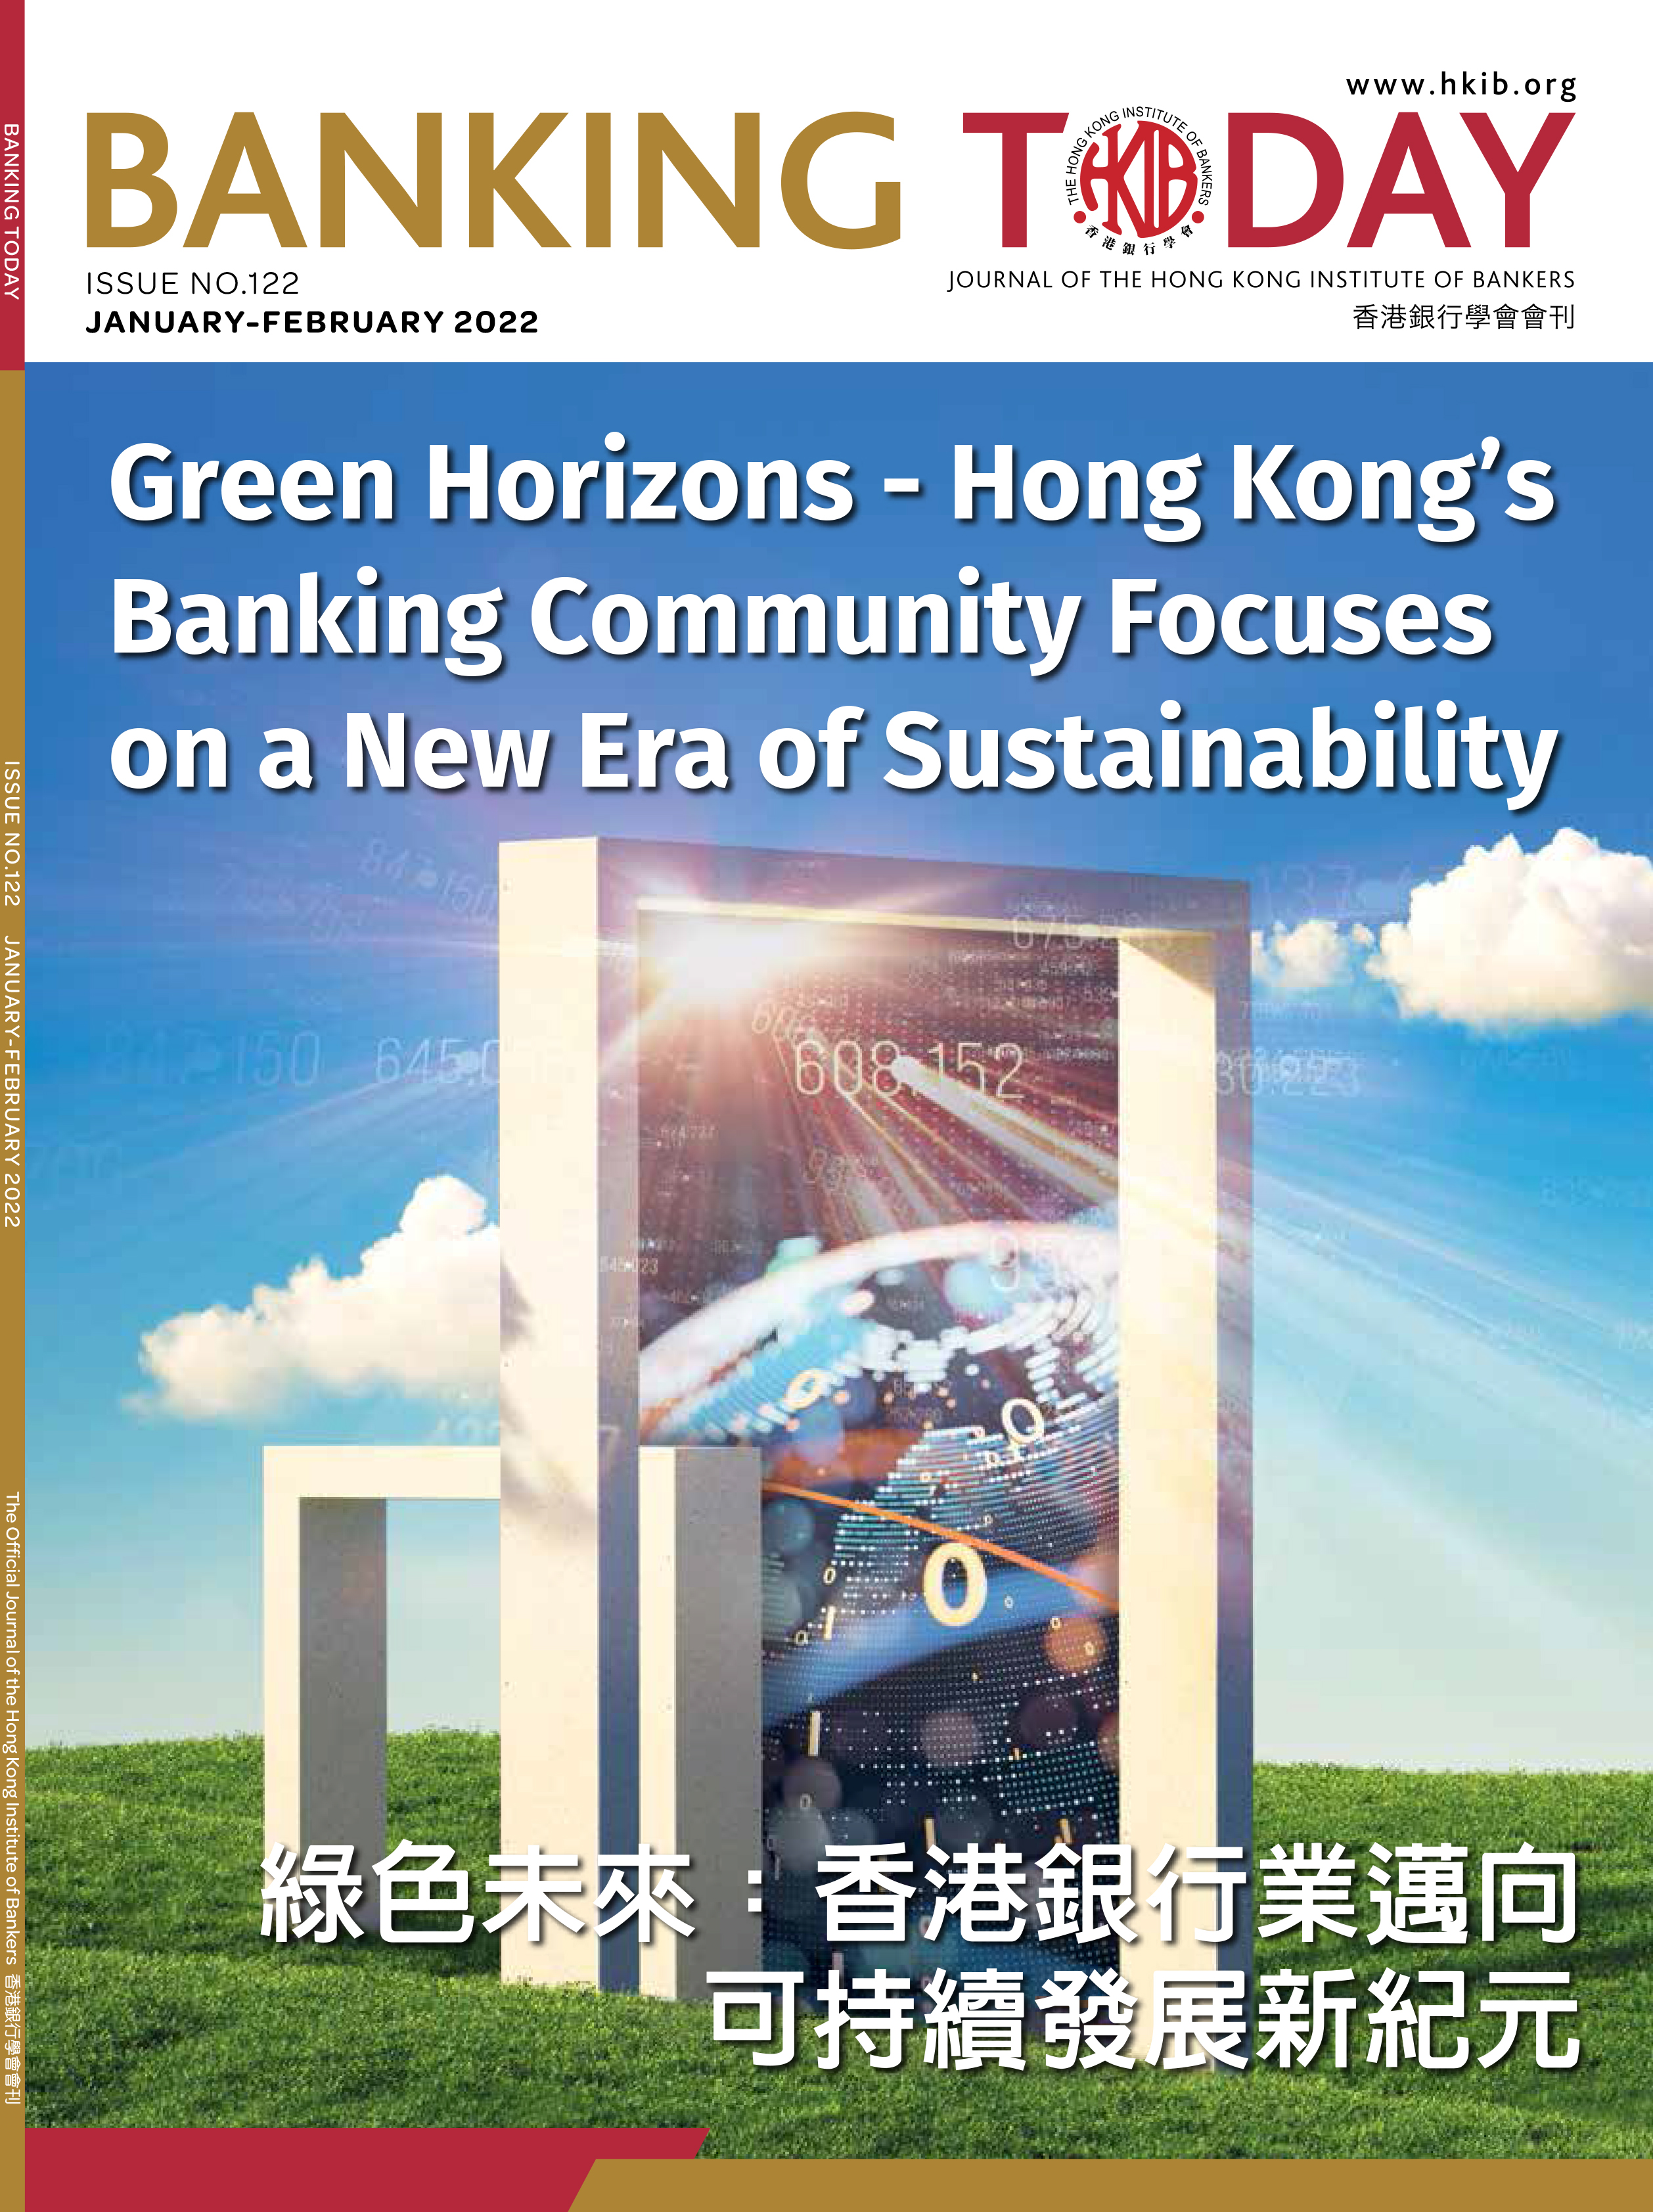 Green Horizons - Hong Kong's Banking Community Focuses on a New Era of Sustainability